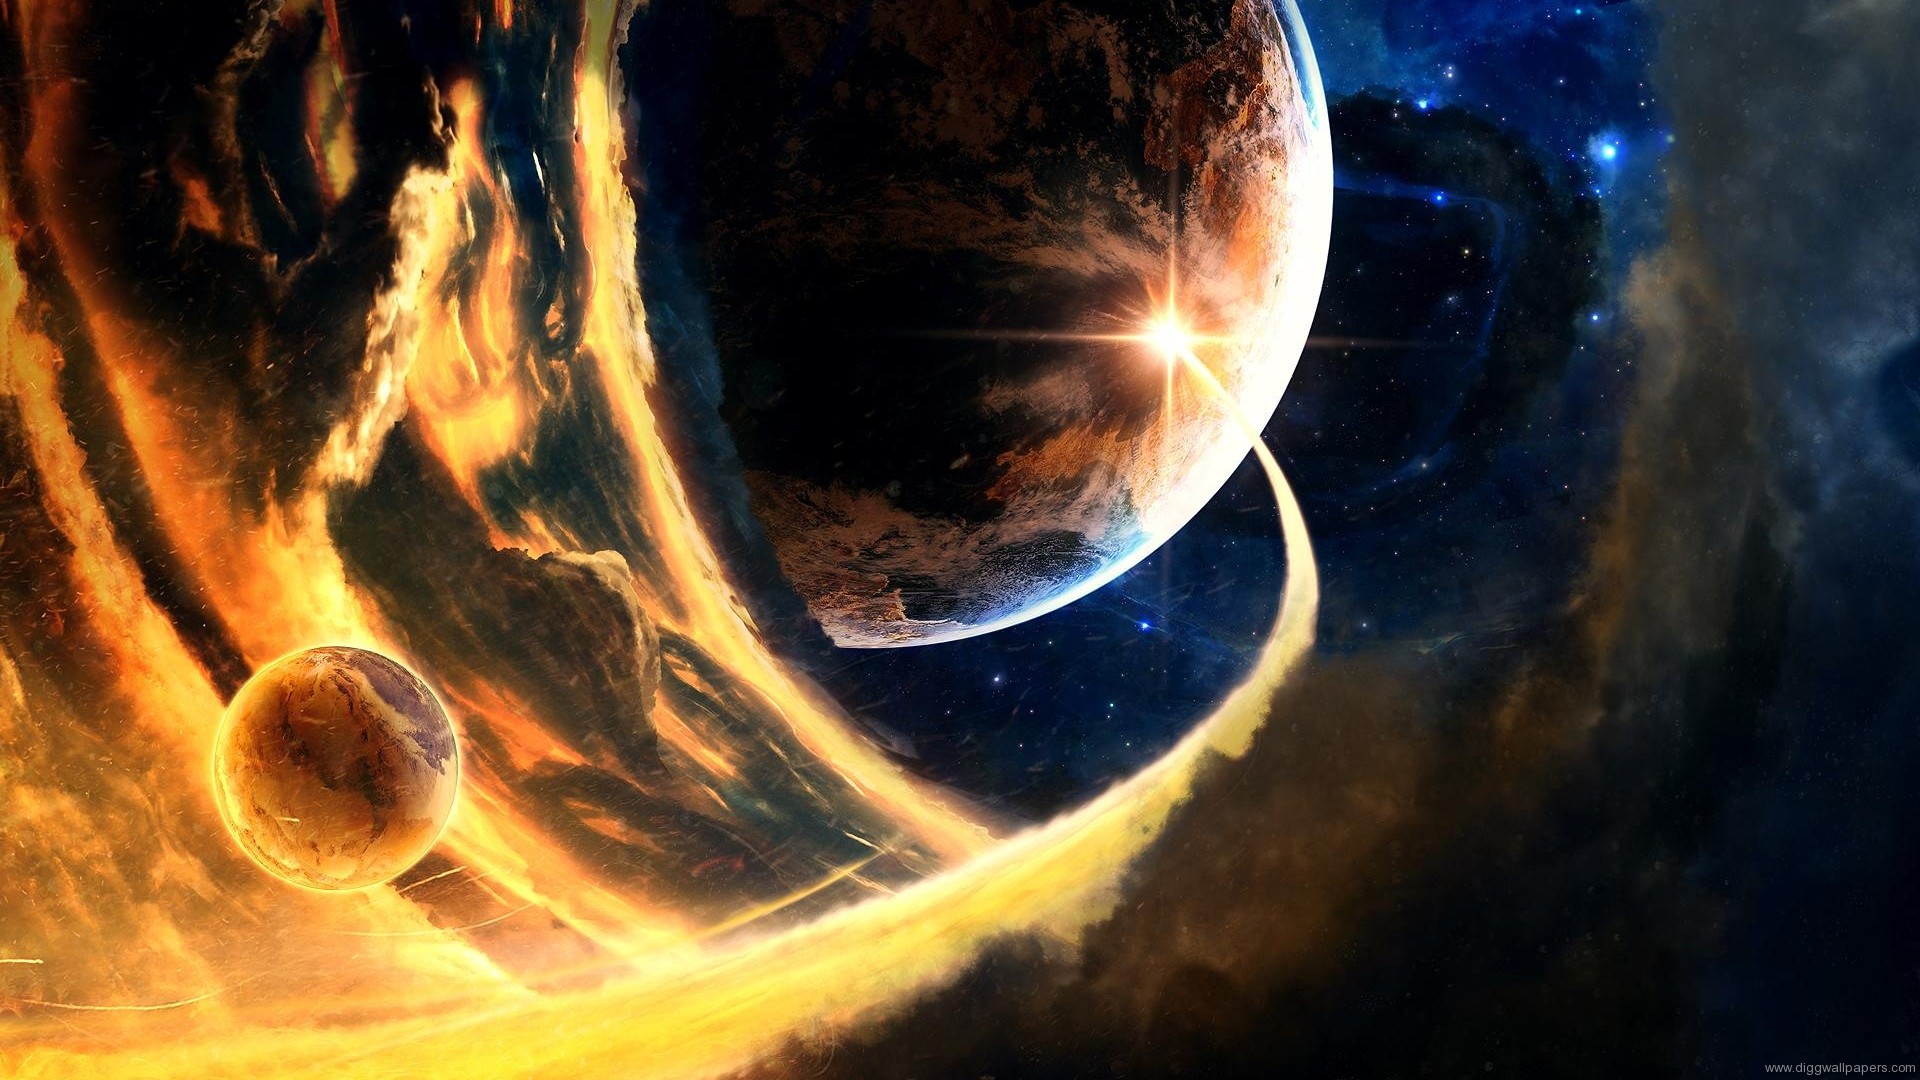 Pc Wallpaper Planets: Wallpaper Cool Planet Impacts Images 1920x1080px